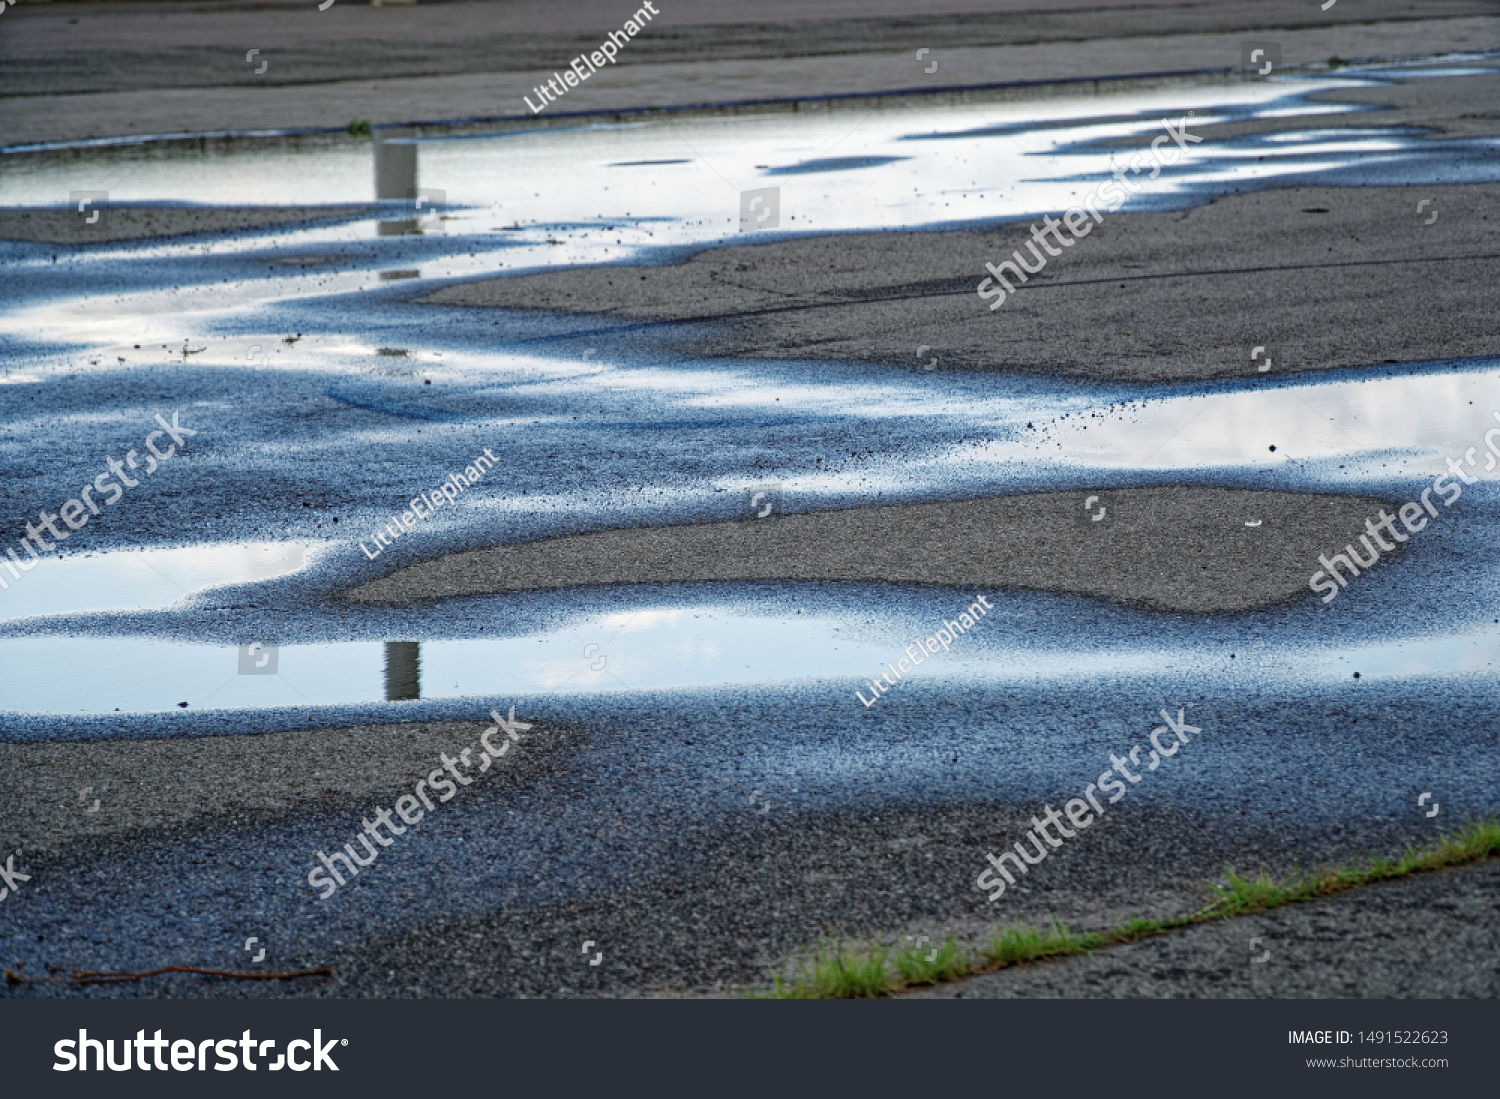 Sky reflected in a puddle of water on pavement, Early morning sunrise #1491522623